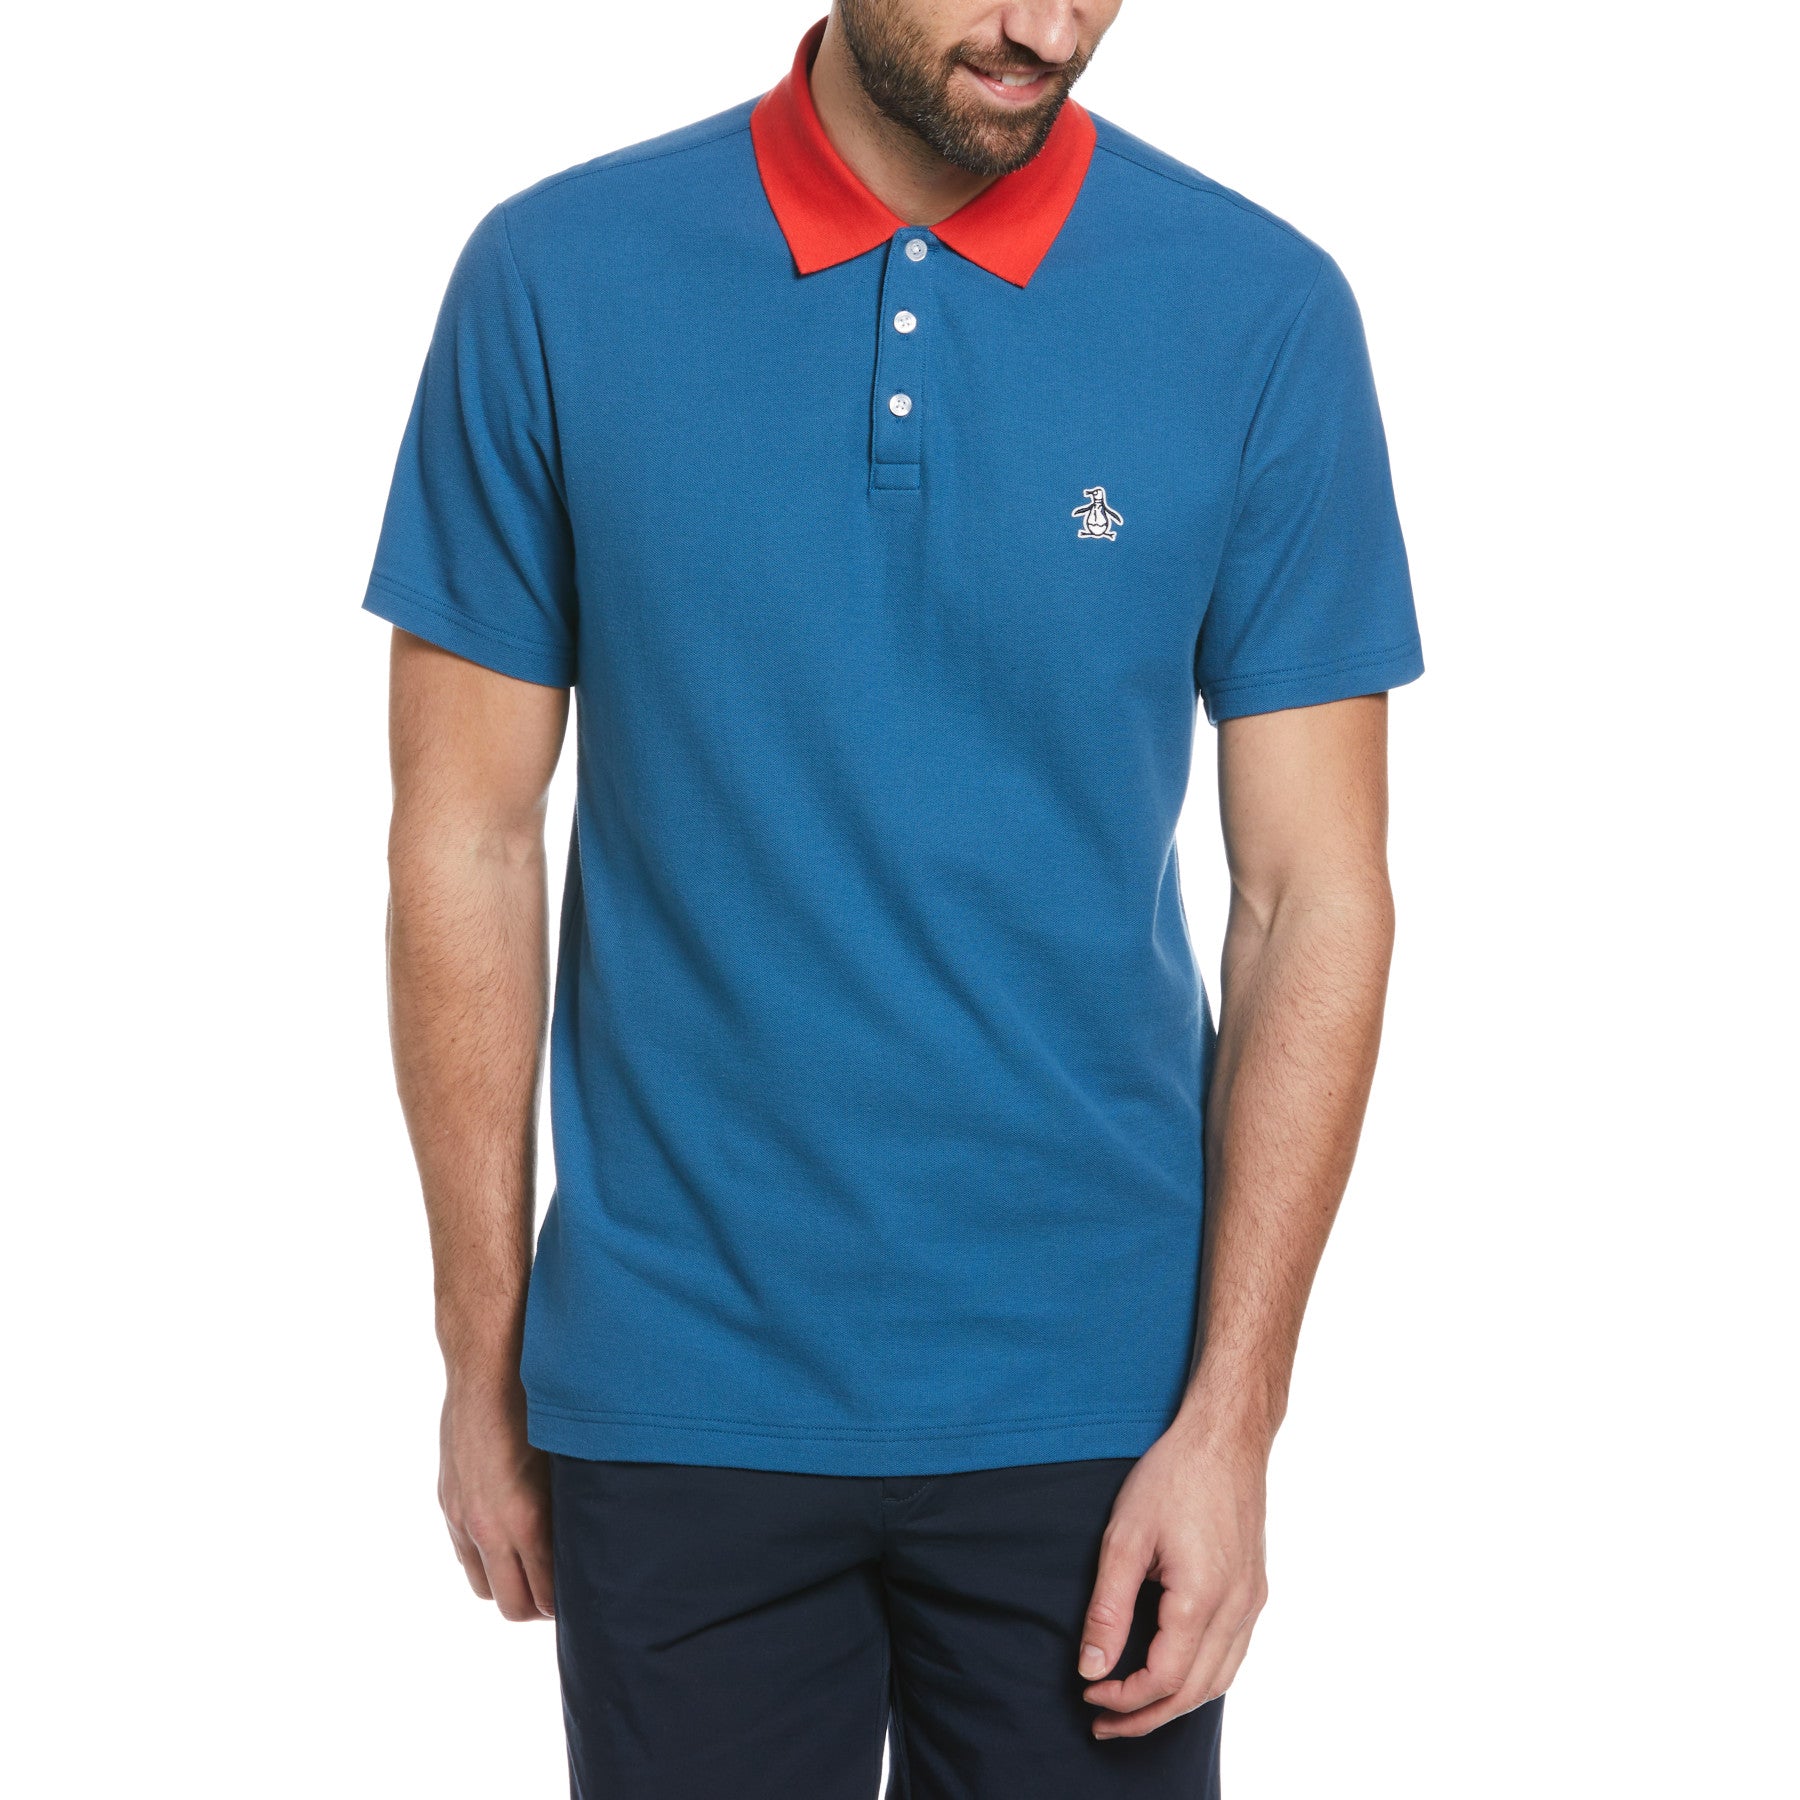 View Contrast Collar Polo Shirt In Dark Blue Outlet information